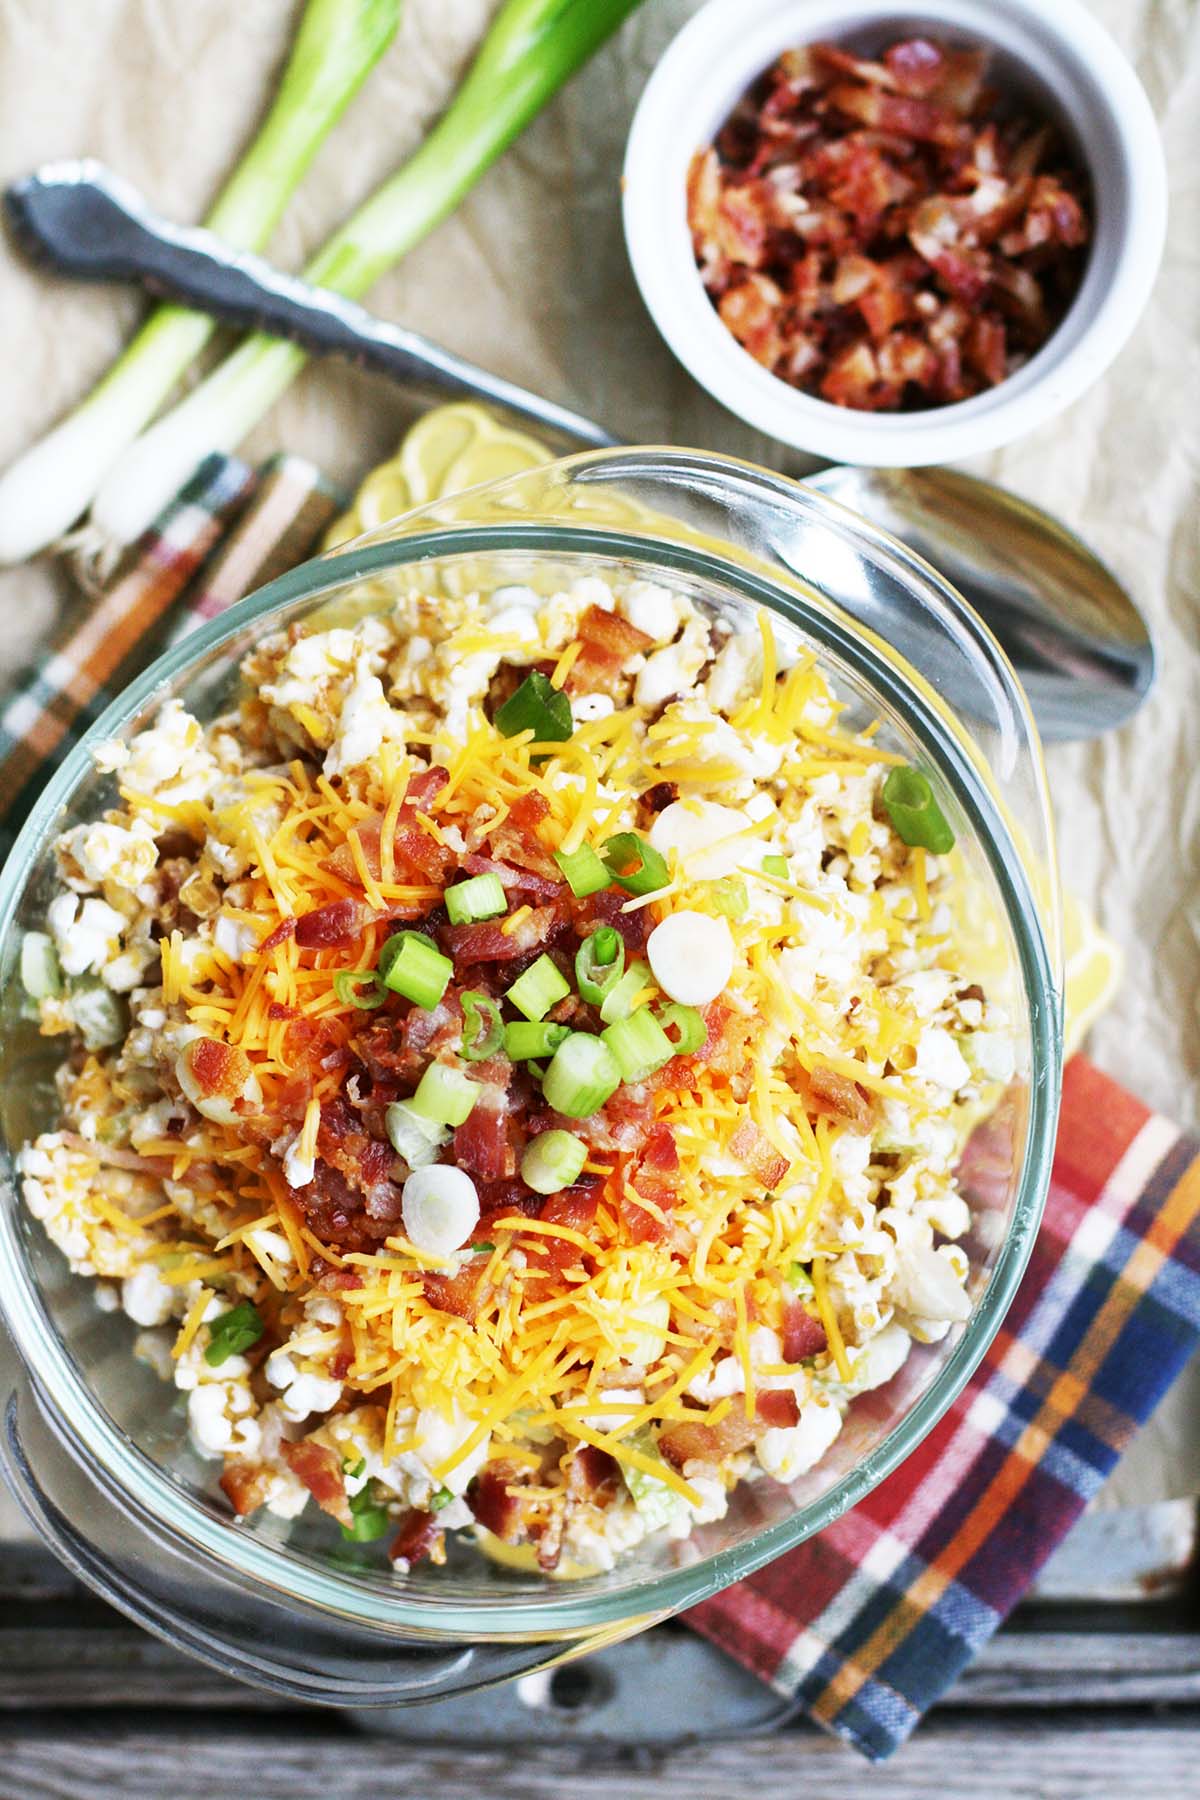 Popcorn salad: Popcorn takes the place of pasta in this picnic and potluck-loving salad.